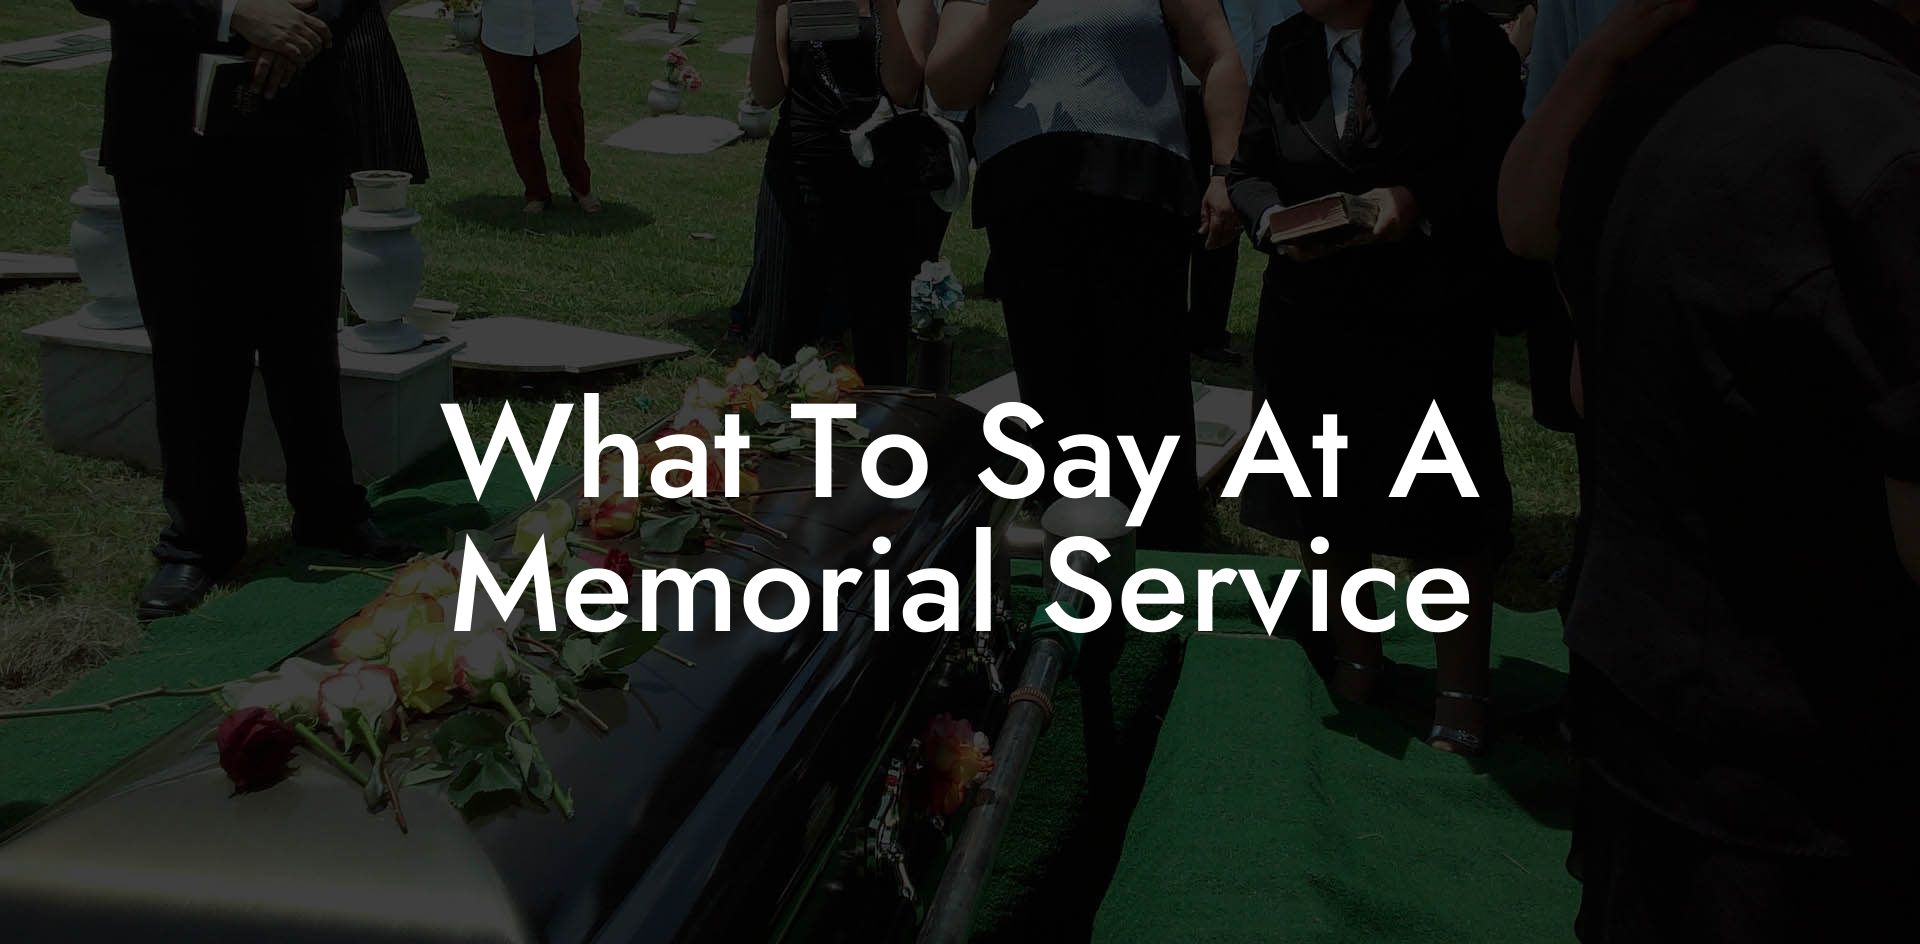 What To Say At A Memorial Service